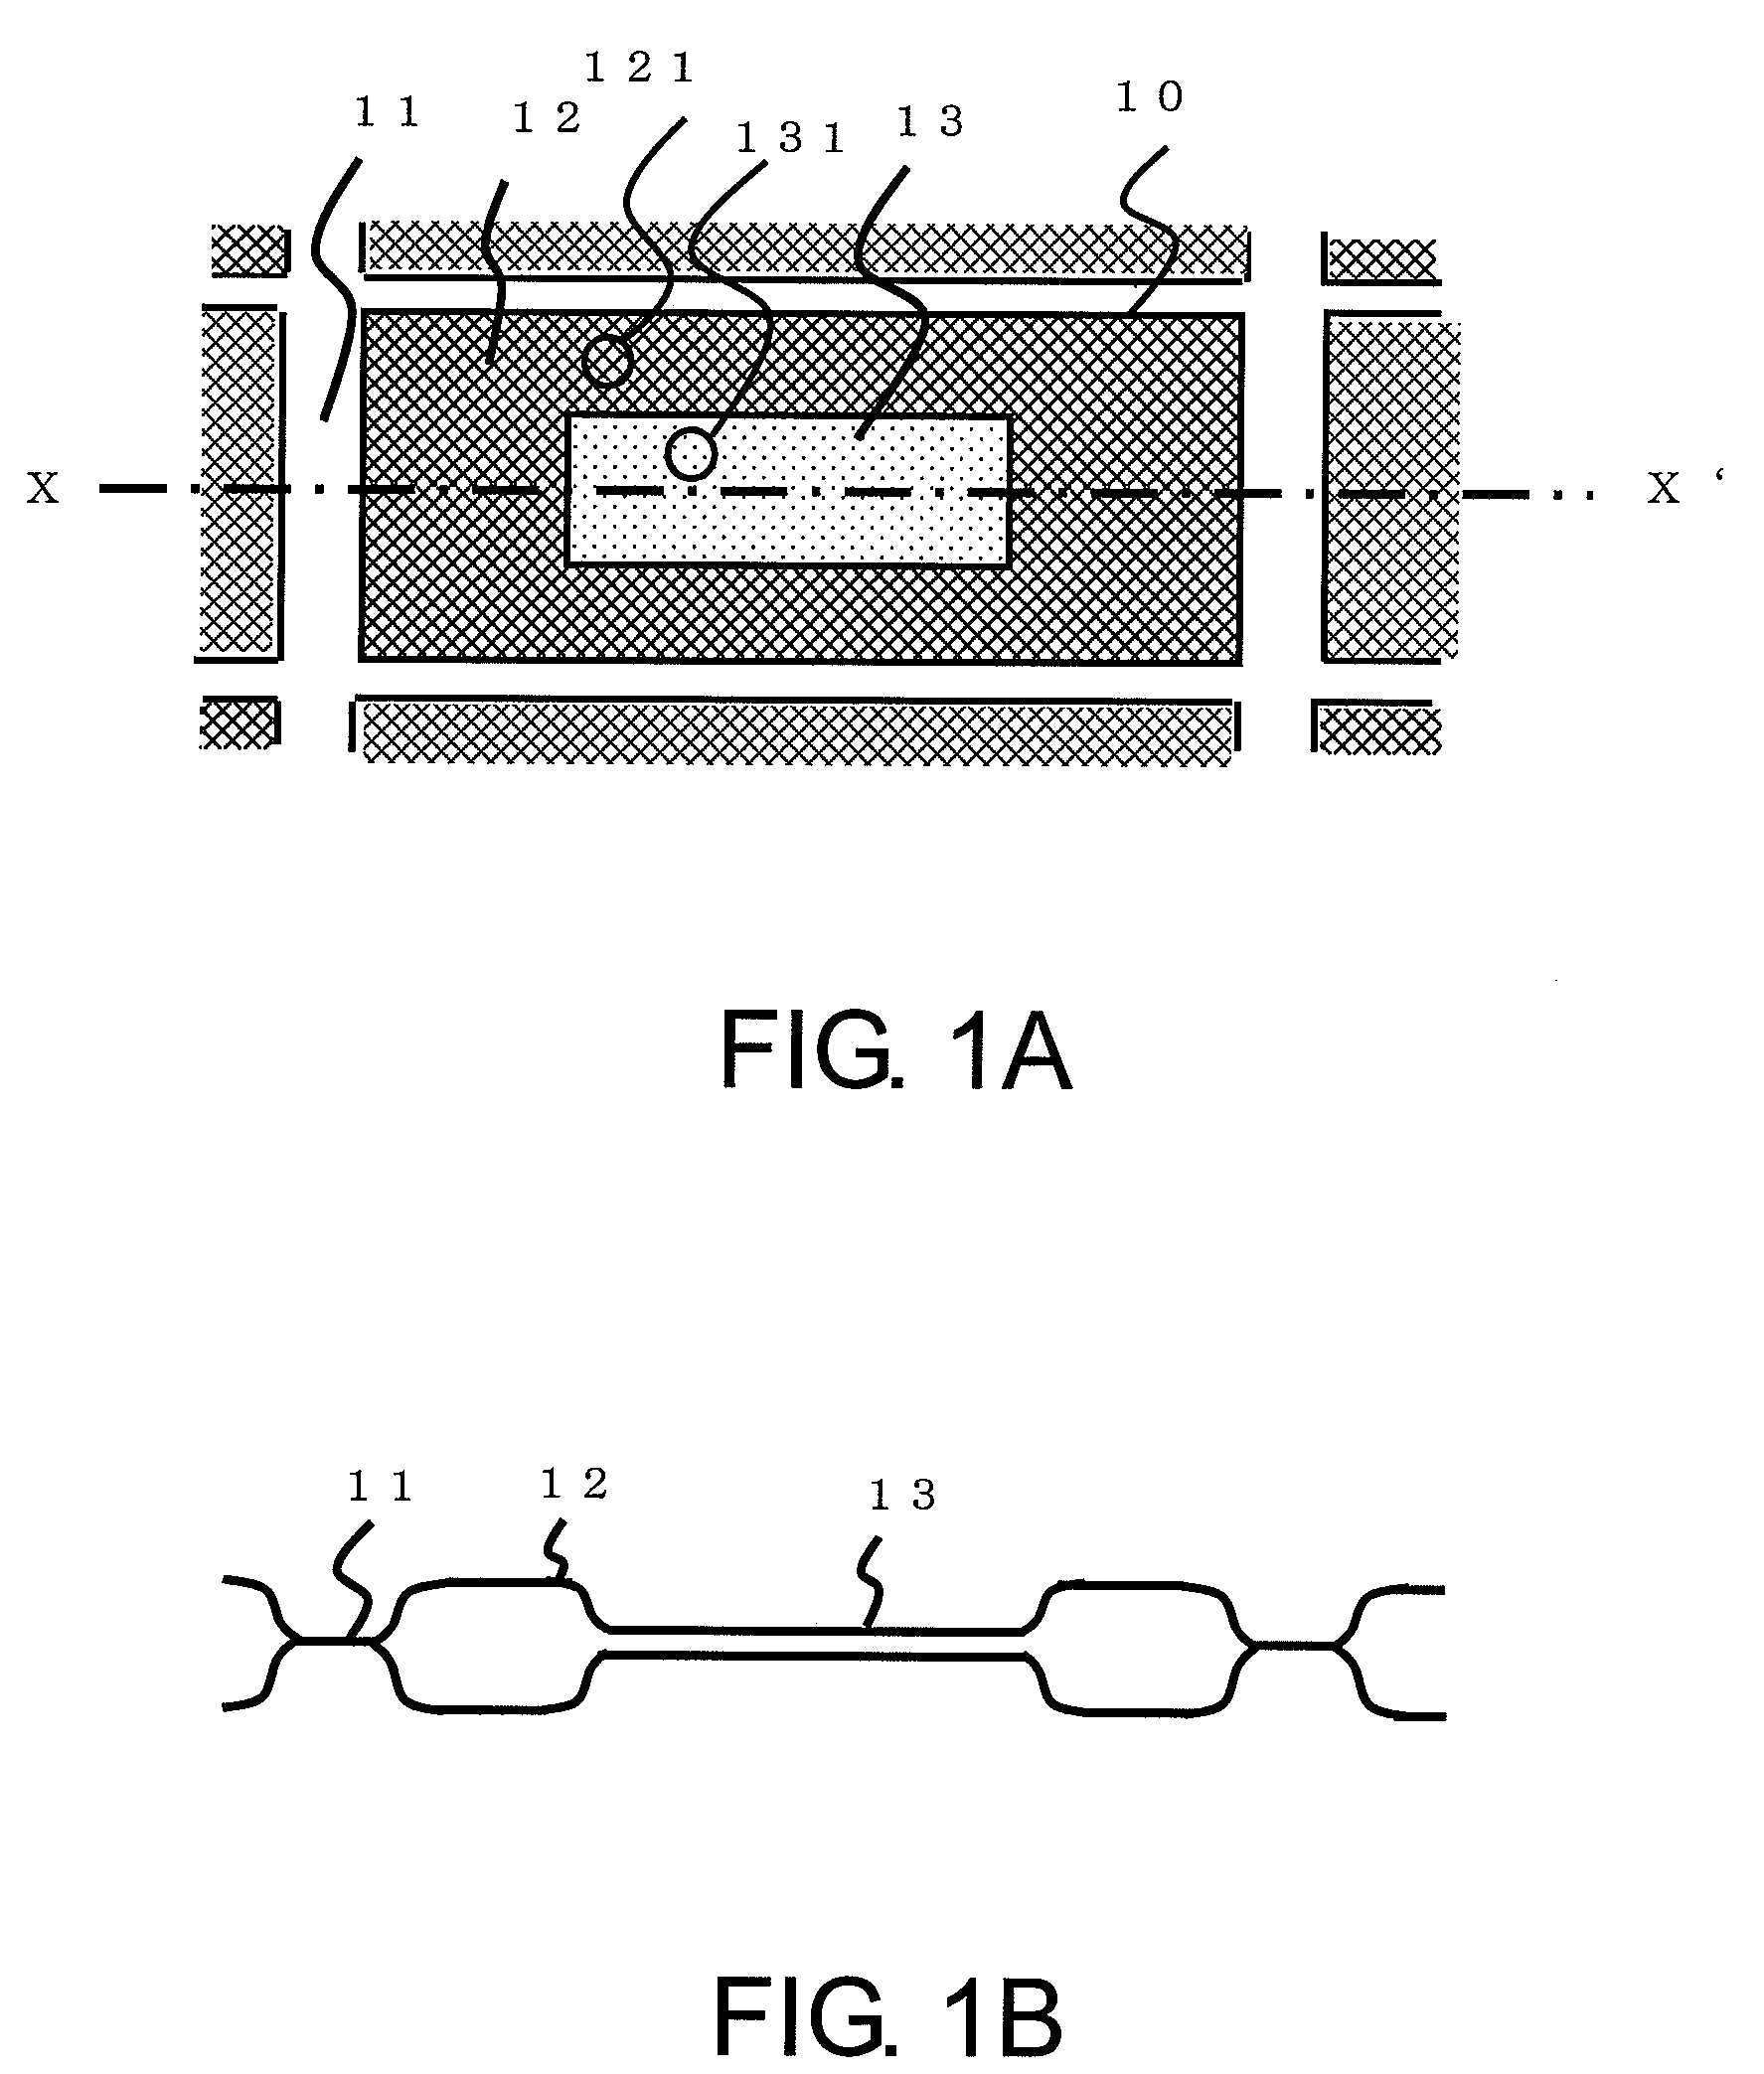 Optical inspection system for a wafer